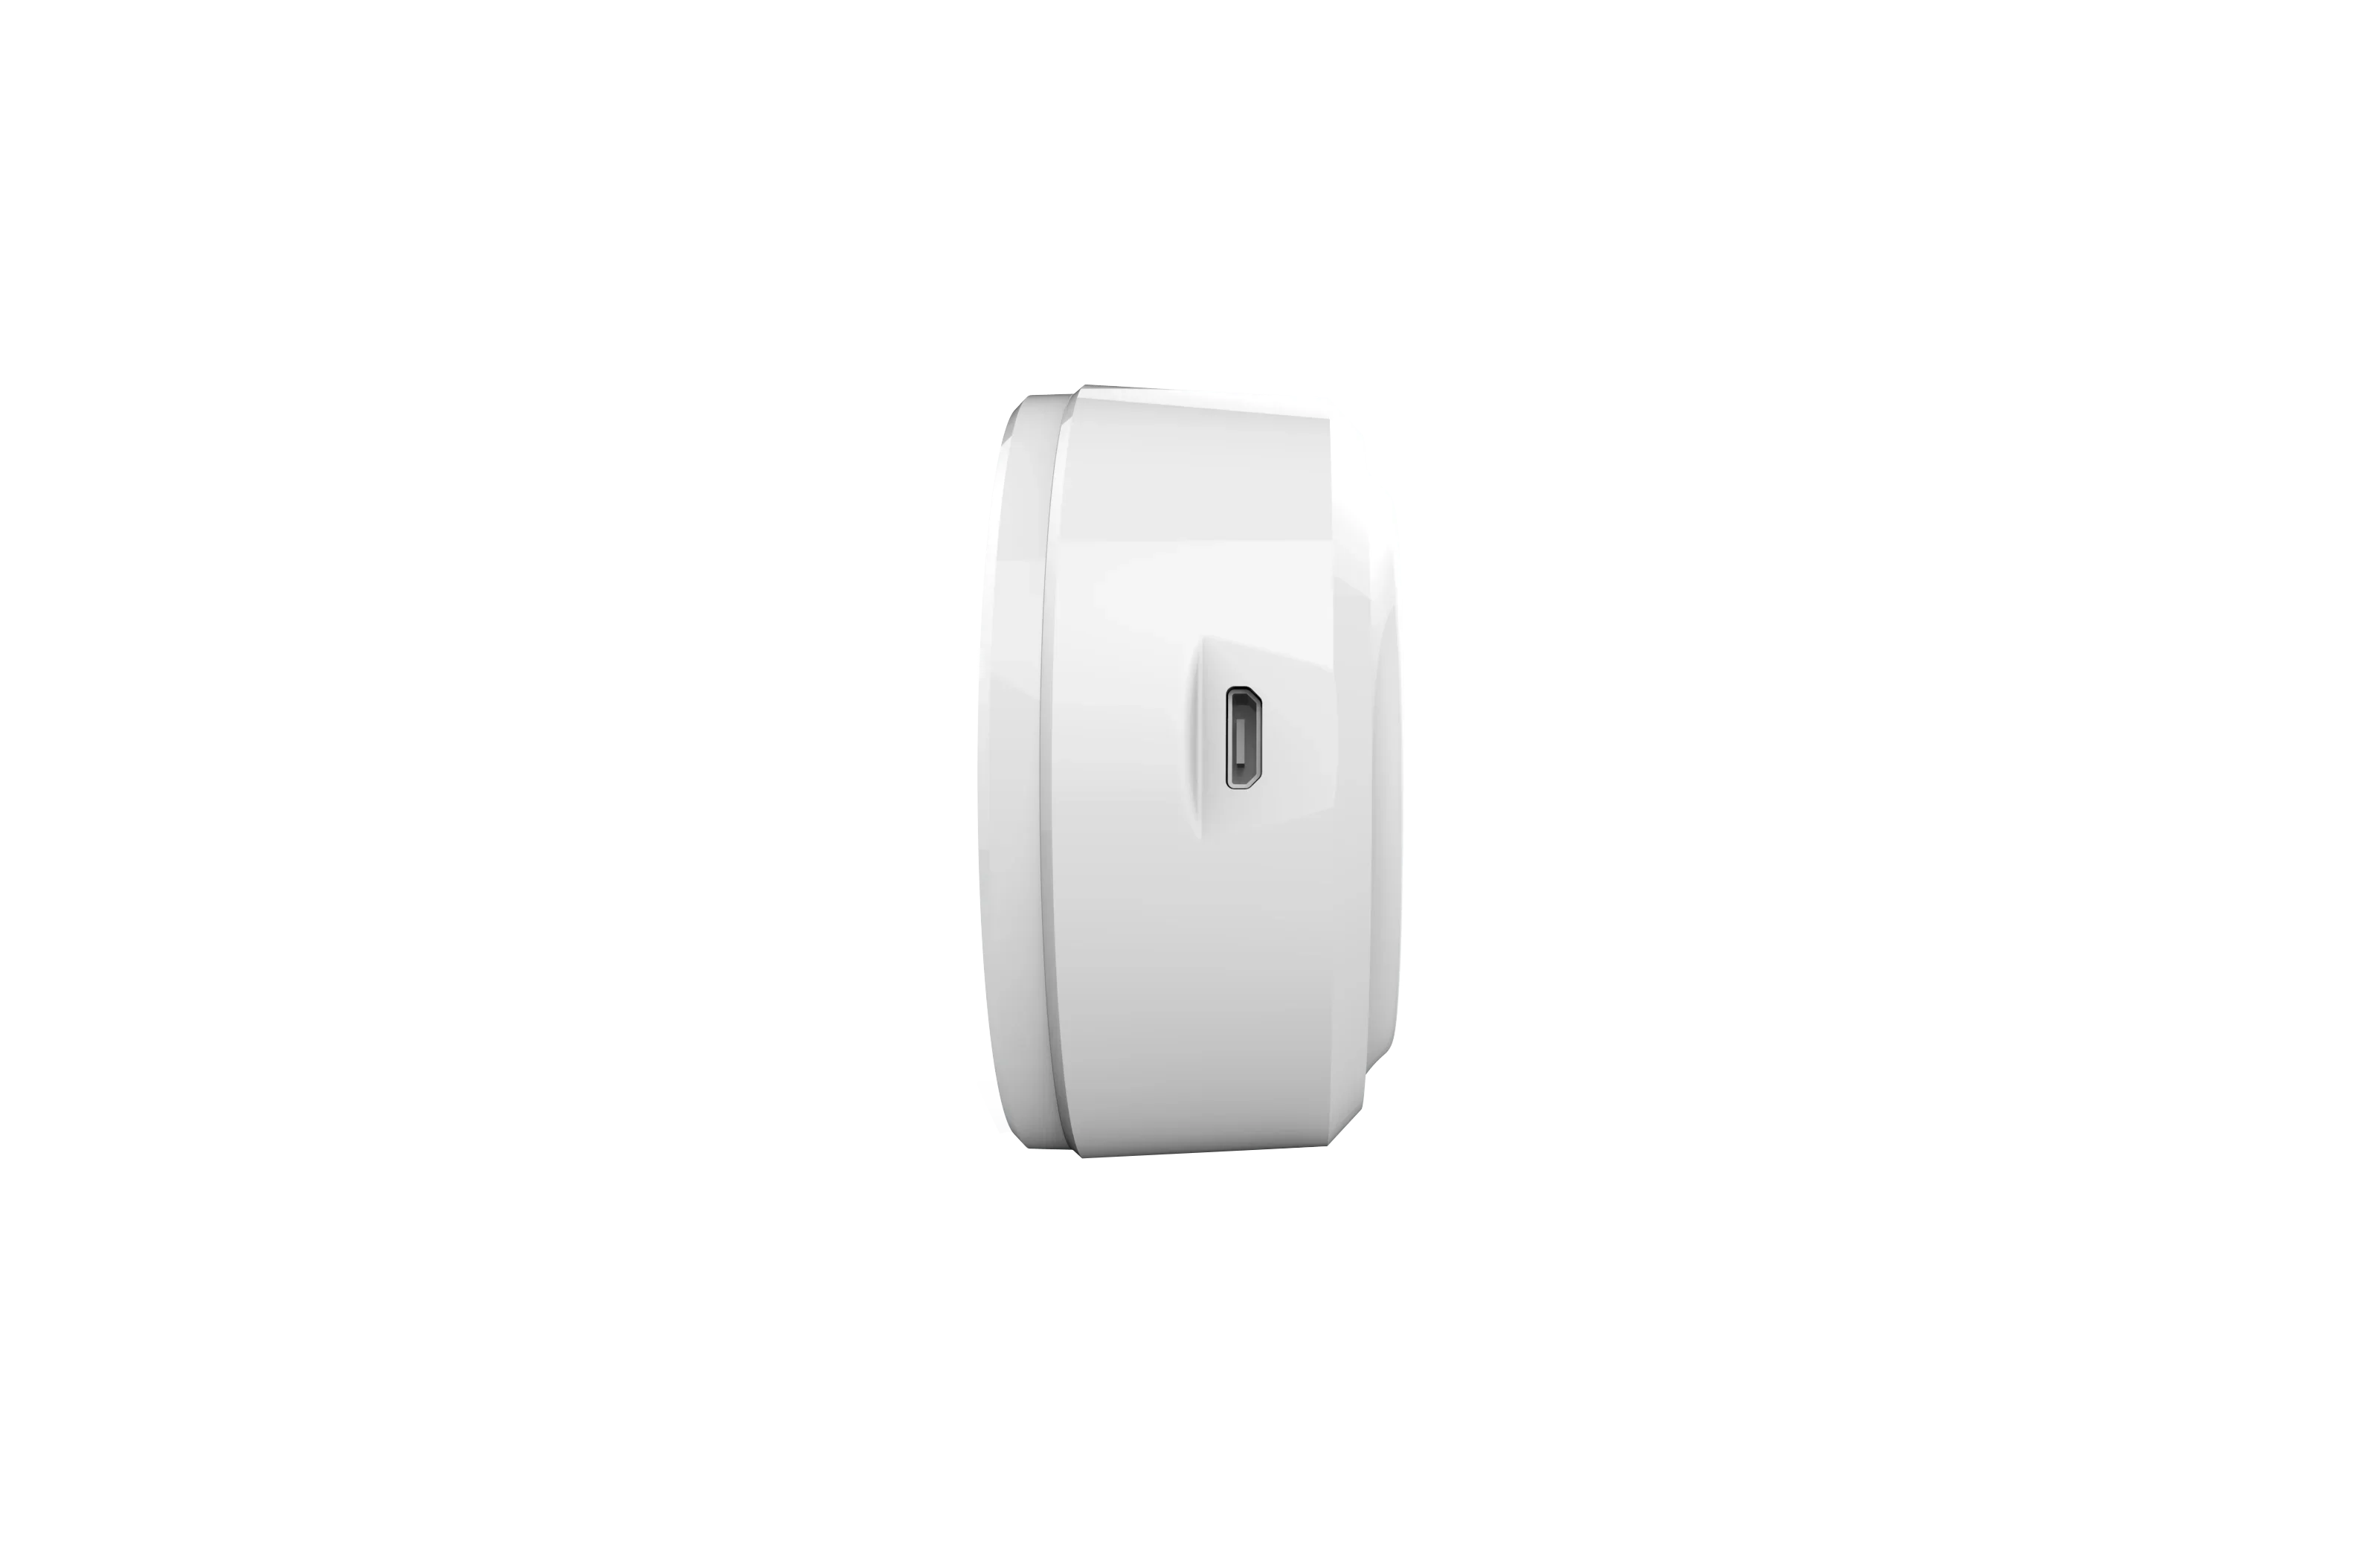 ONENUO Tuya Zigbee Smart Siren Alarm For Home Security with Strobe Alerts Support USB Cable Power and Built-in Battery